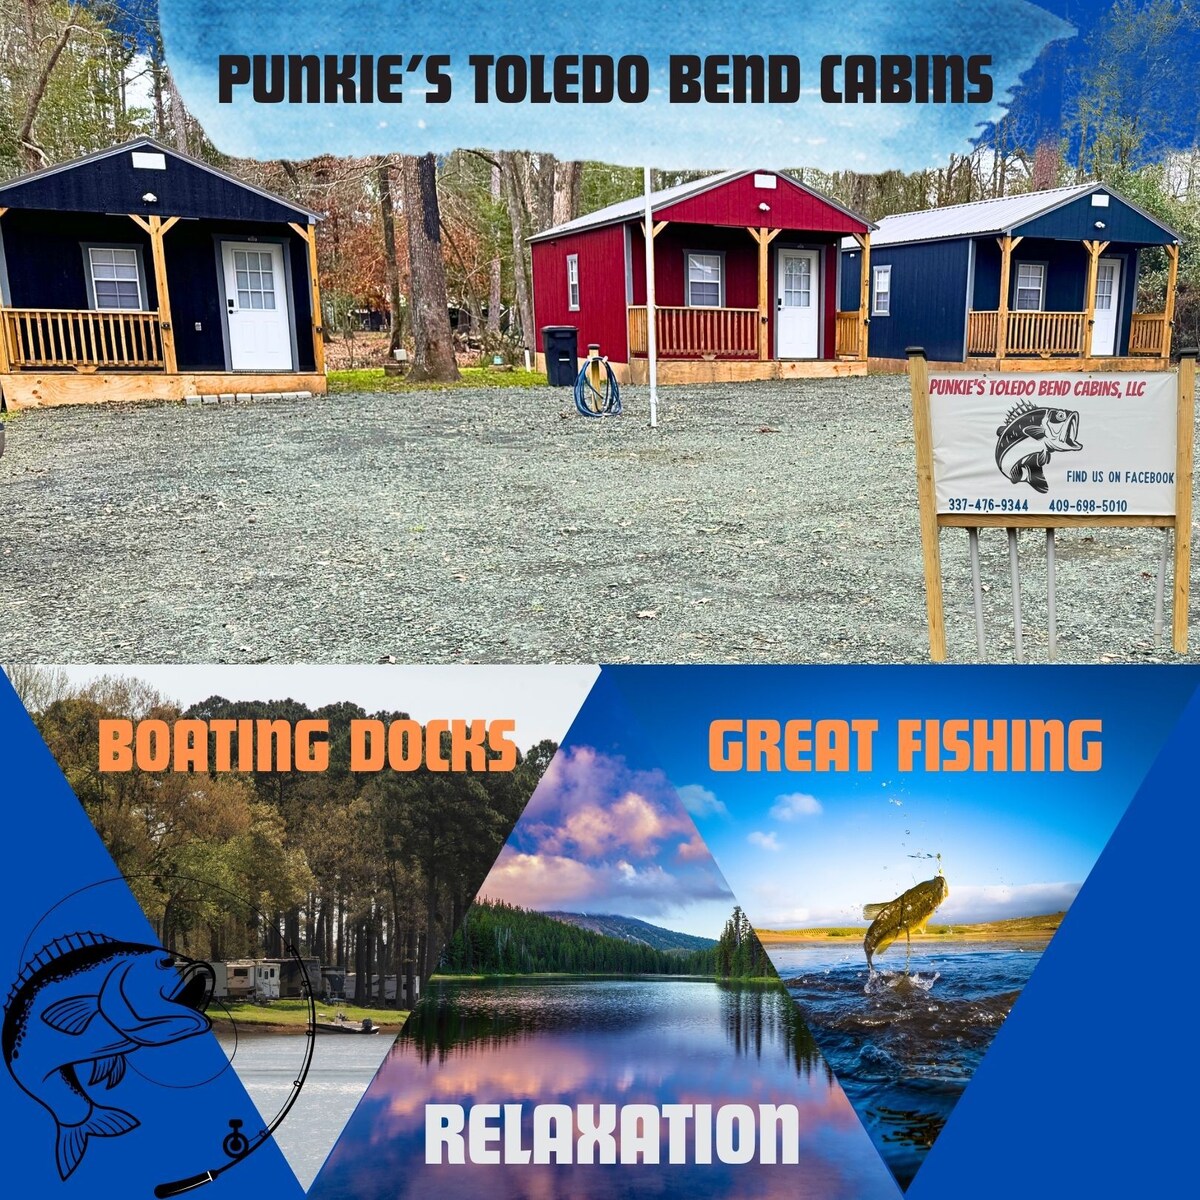 Punkie's Toledo Bend Cabins (RED)